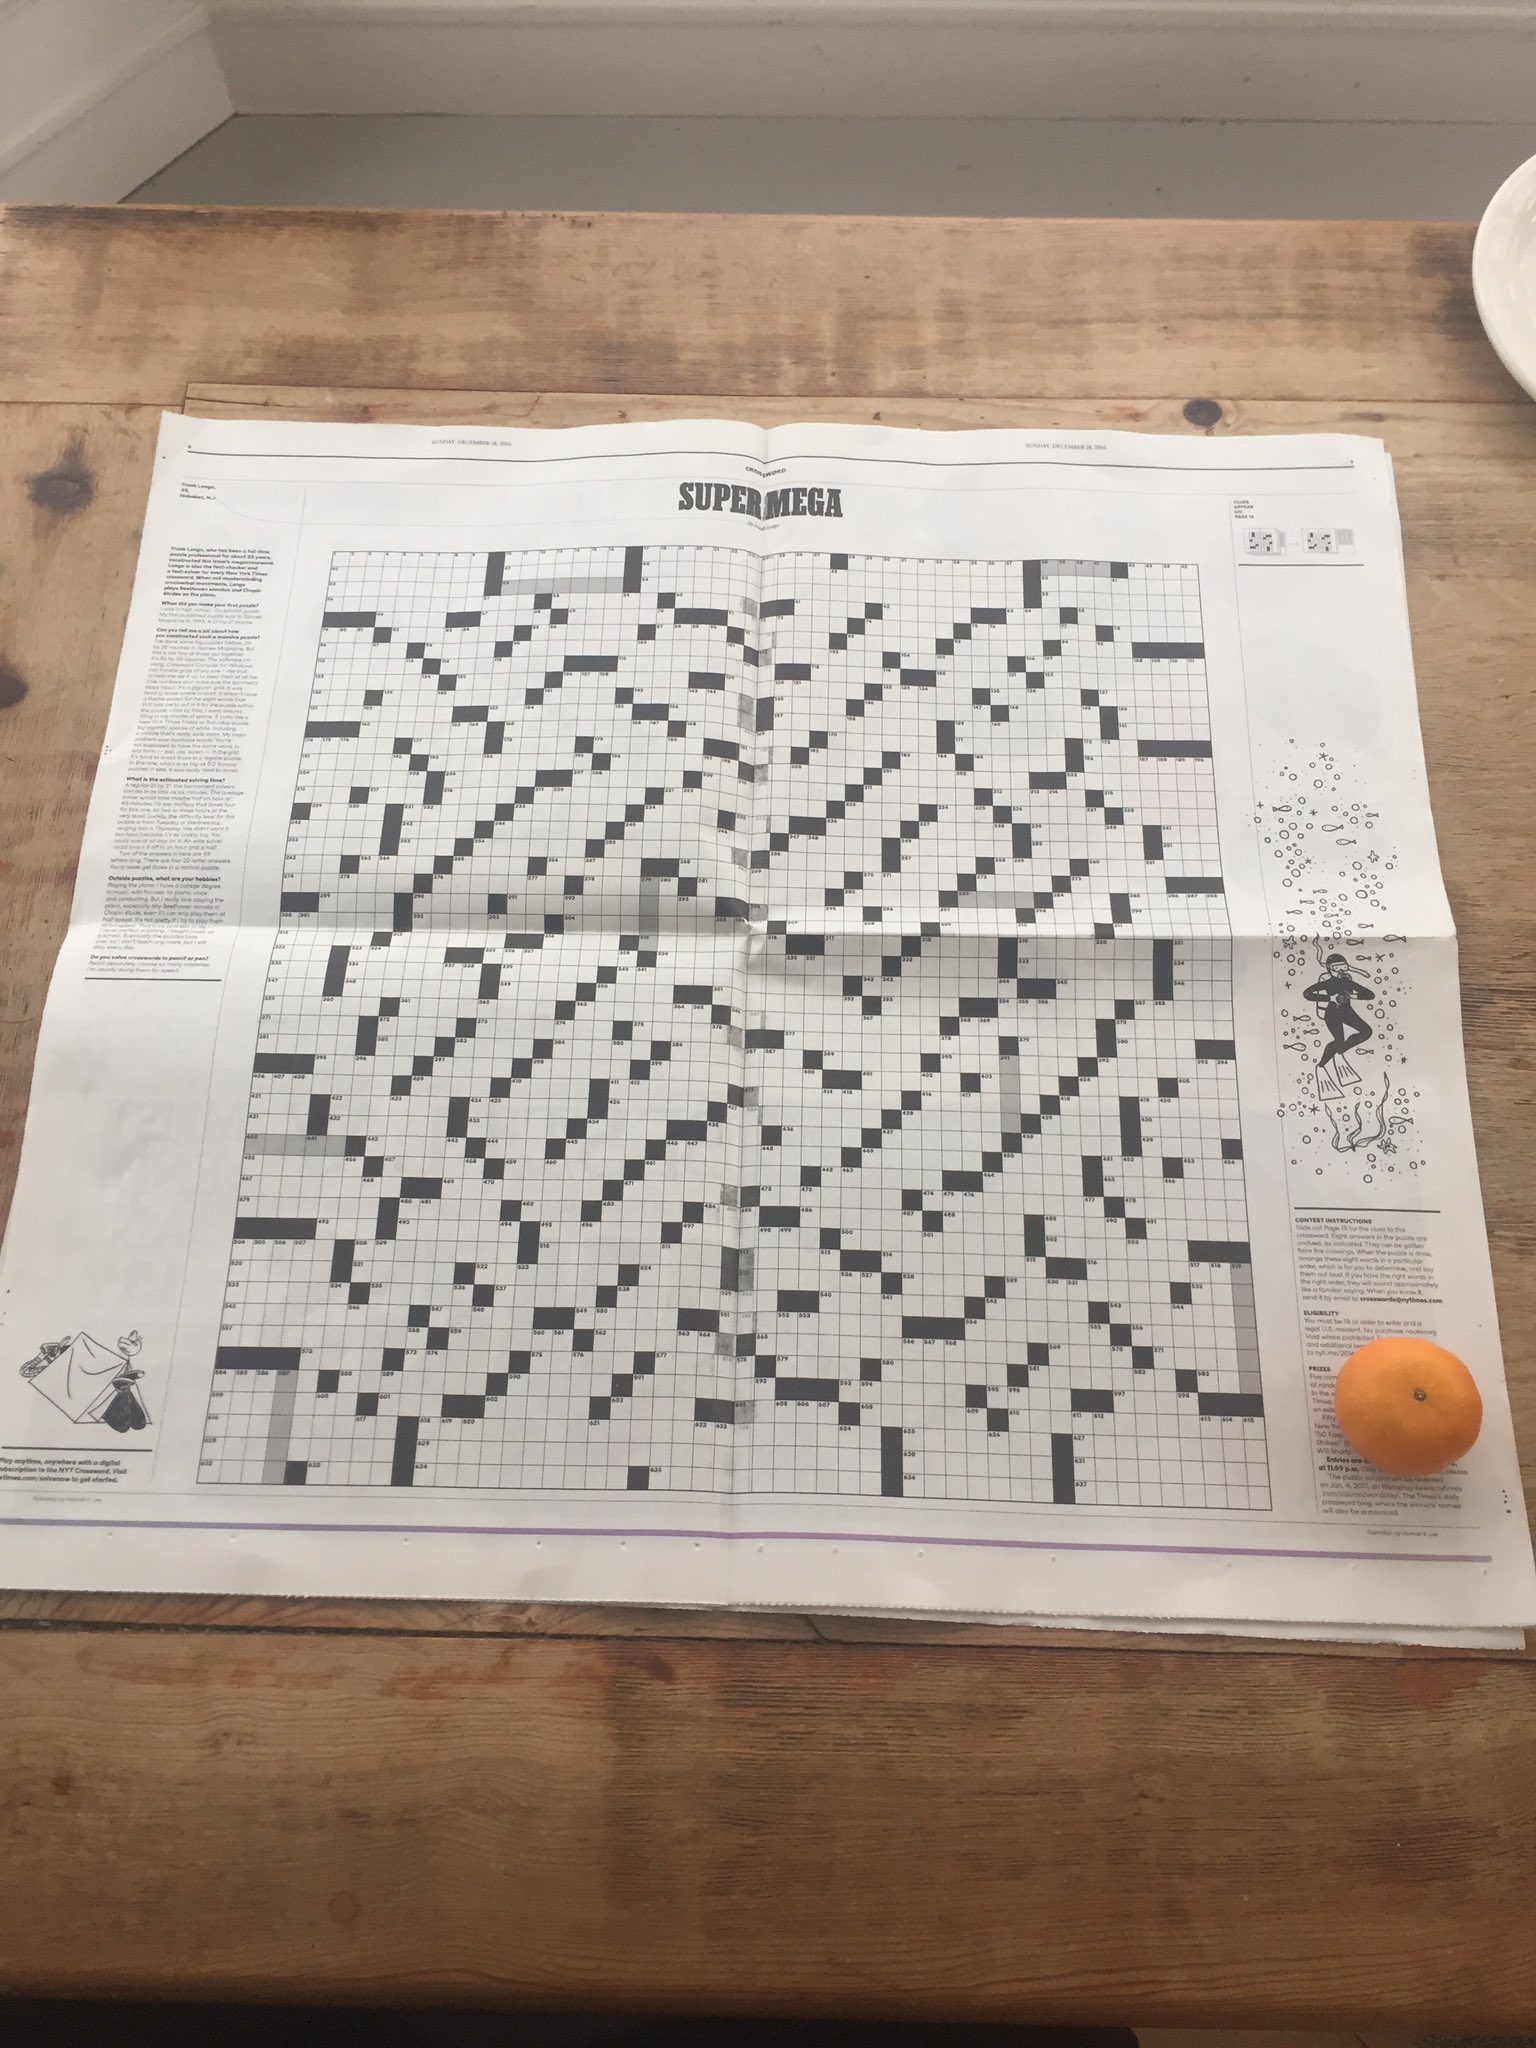 Dating site new york times crossword